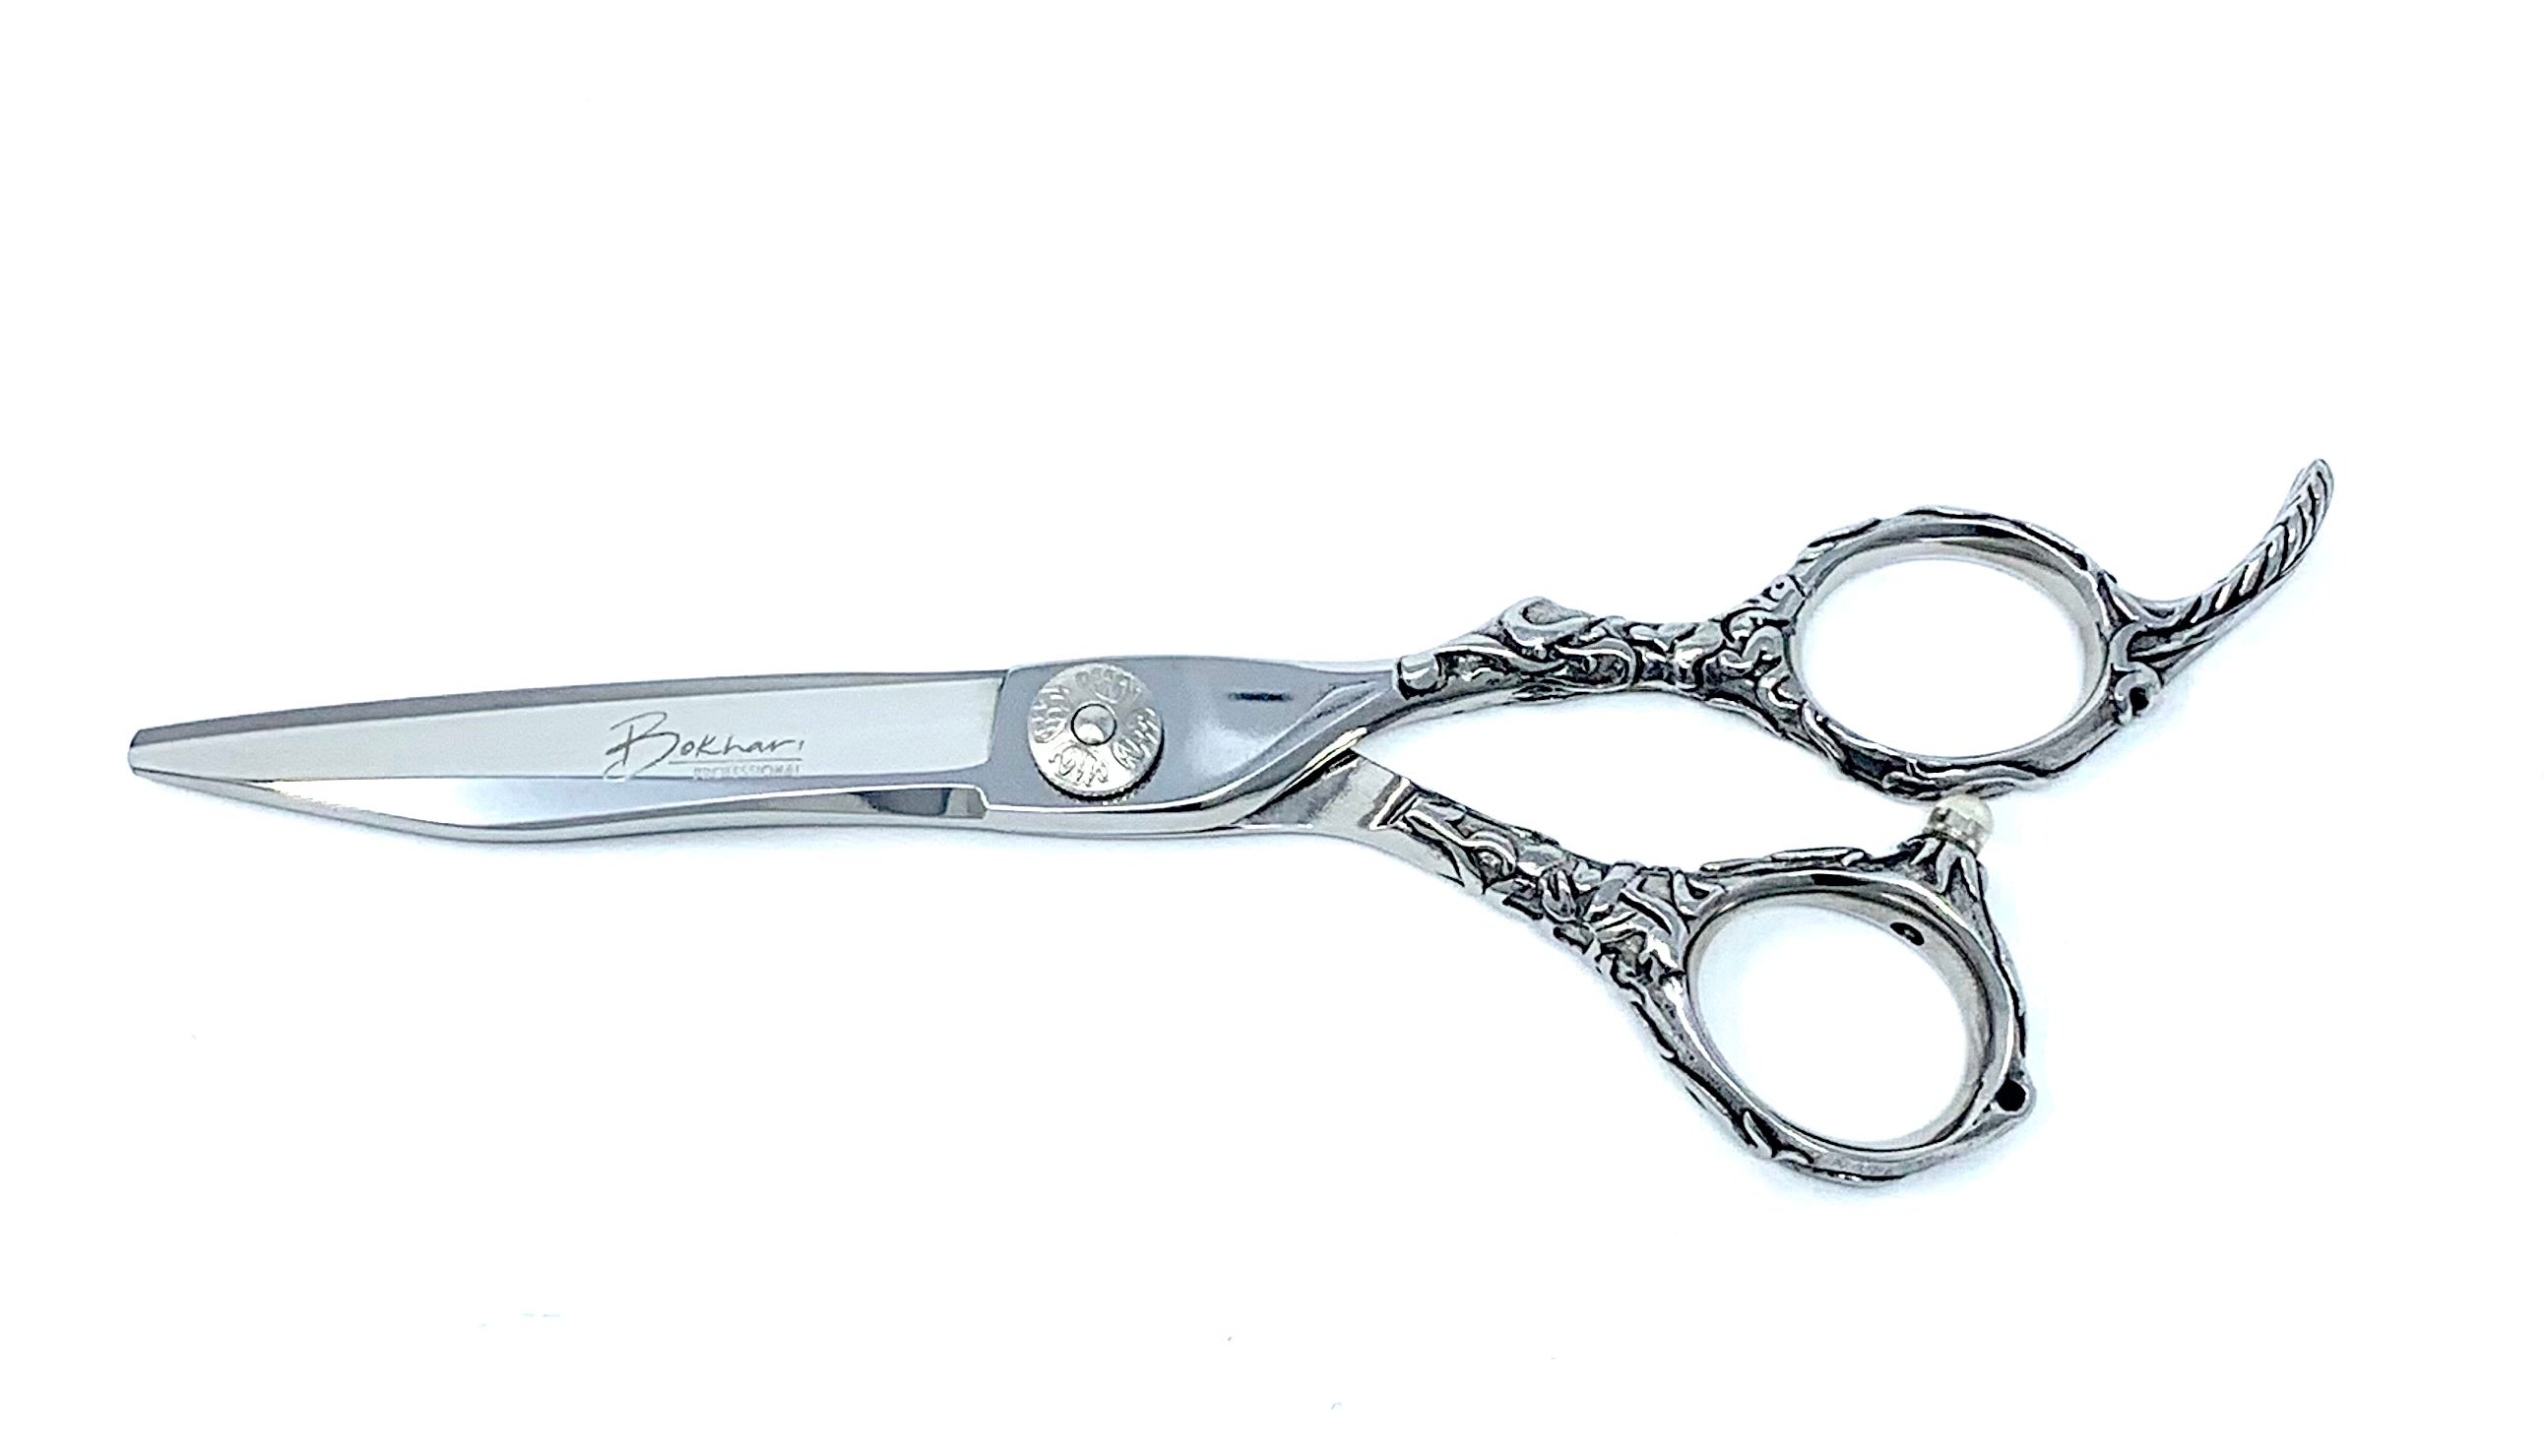 CALA PROFESSIONAL THINNING SHEARS - CALA PRODUCTS